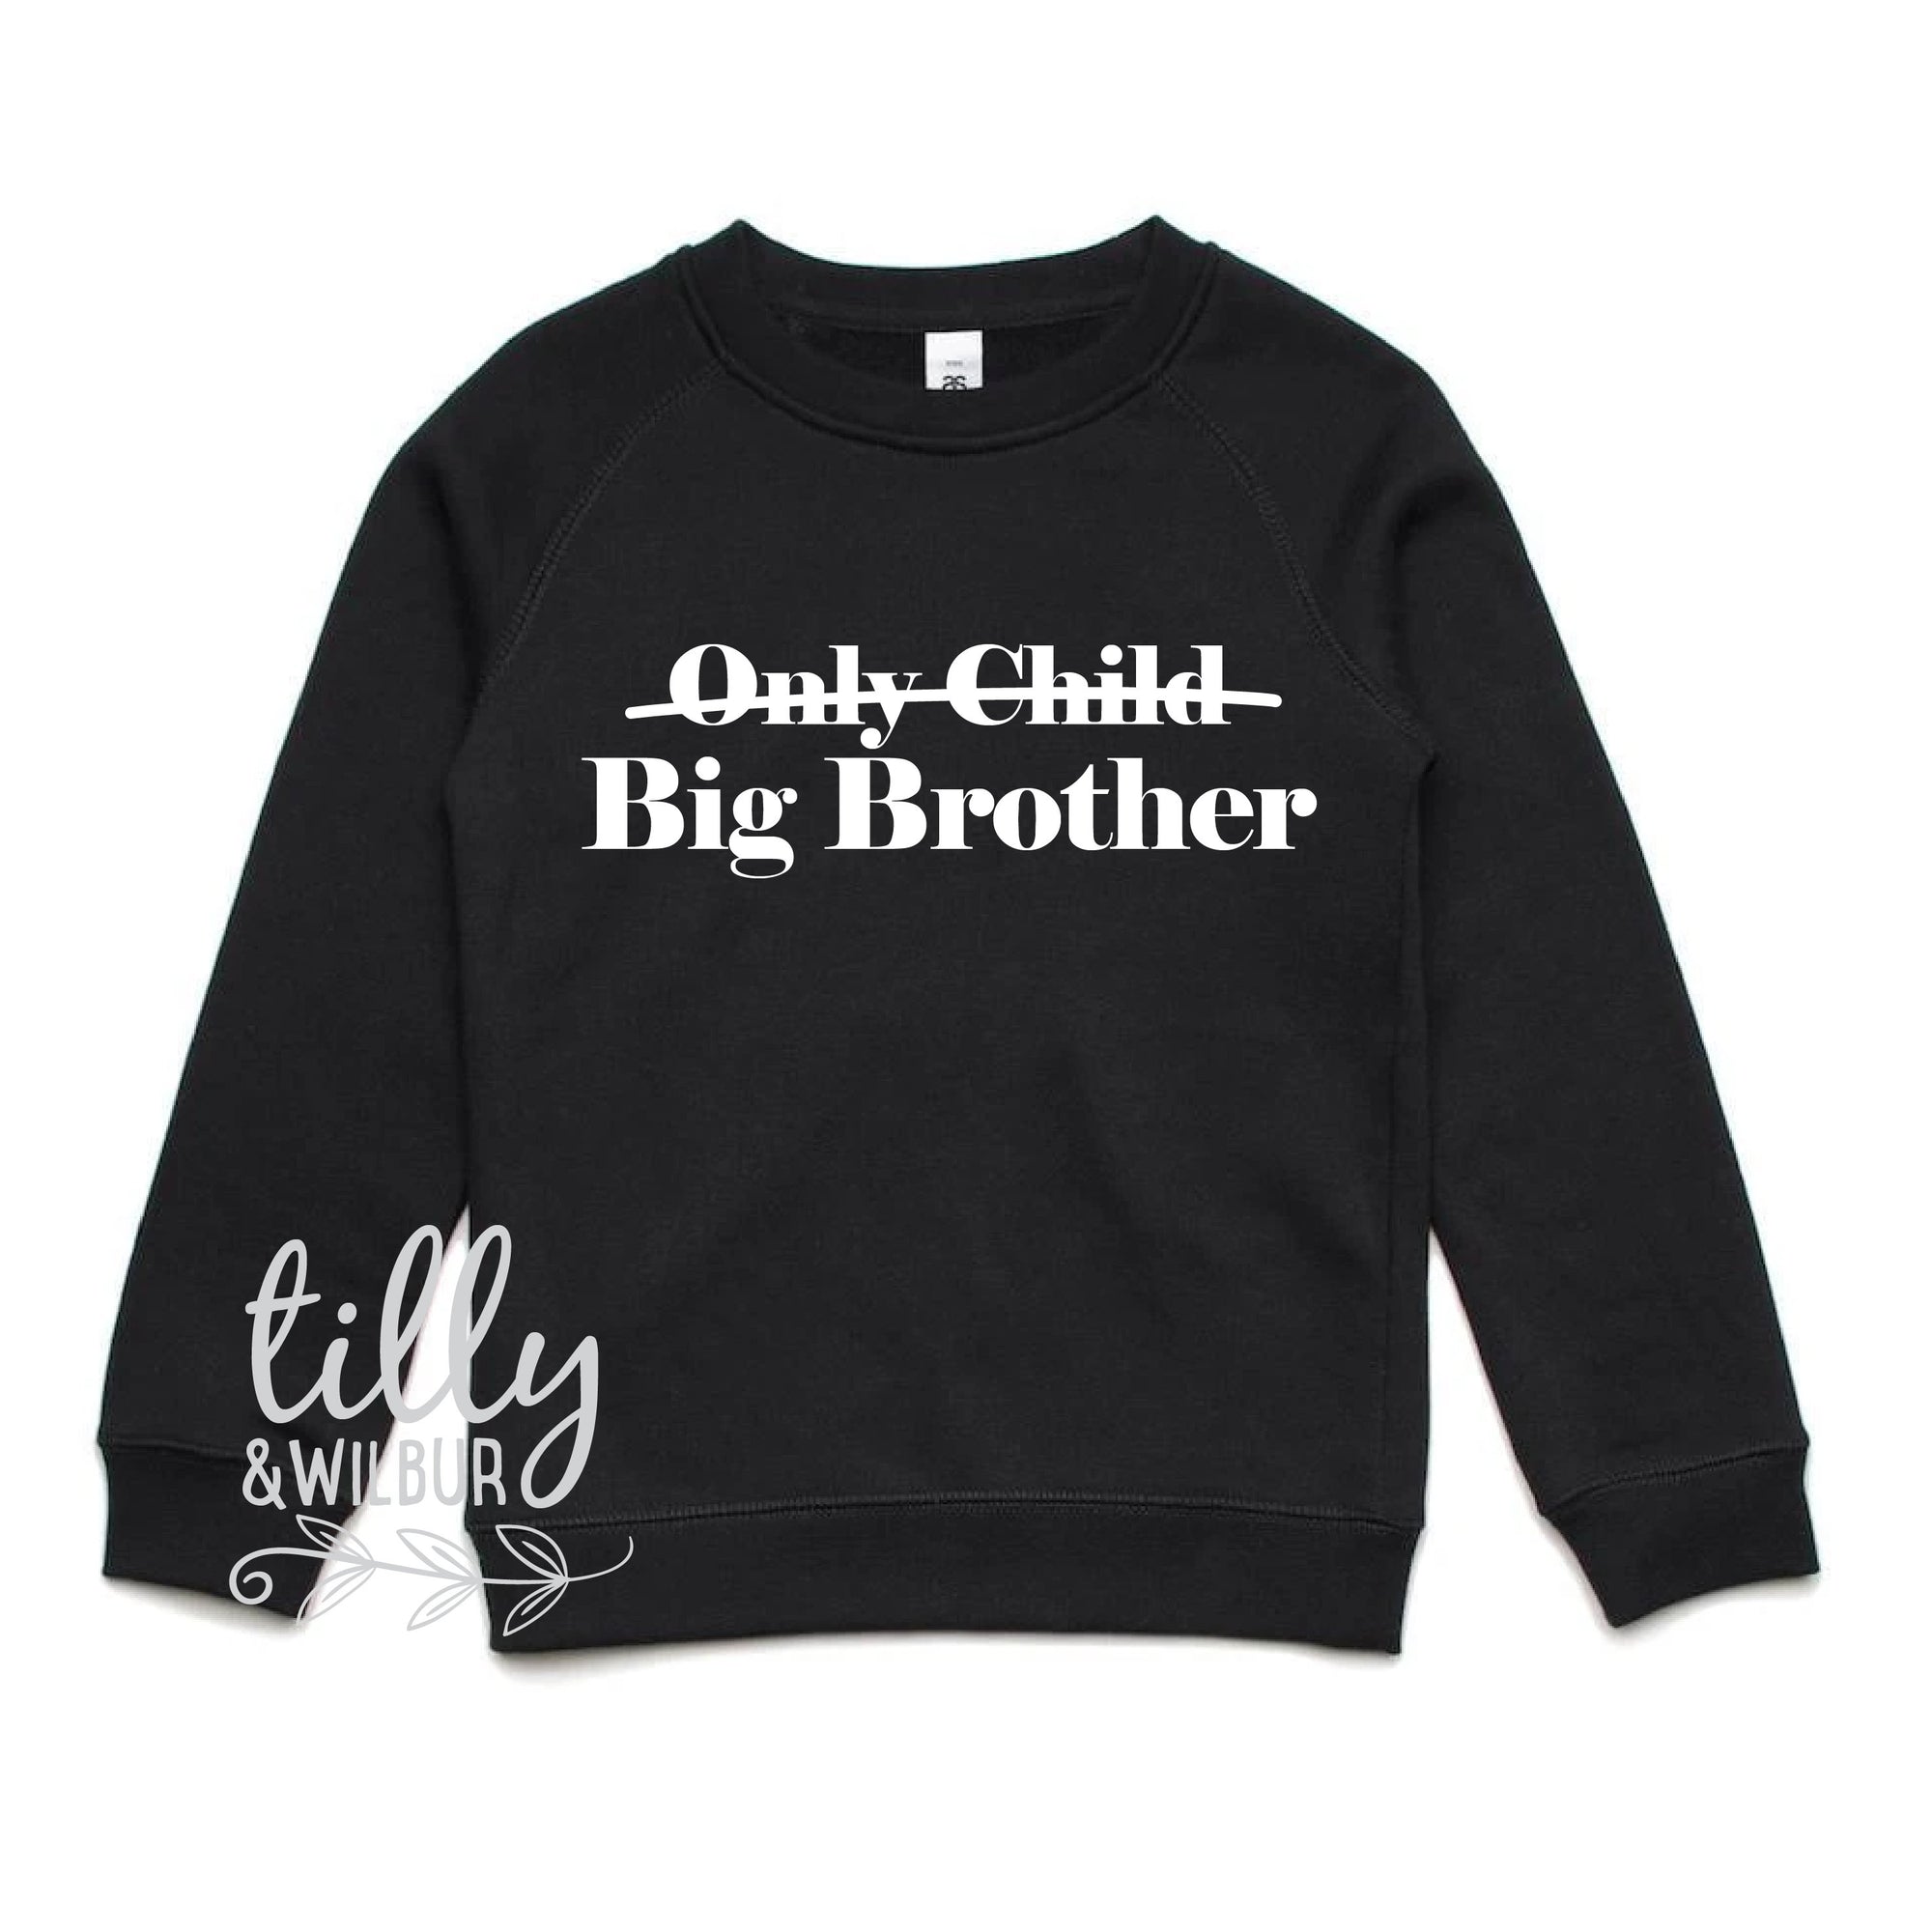 Only Child Big Brother Jumper For Boys, Big Brother Sweatshirt For Boys, Big Brother Announcement Gift, Pregnancy Announcement Sweater